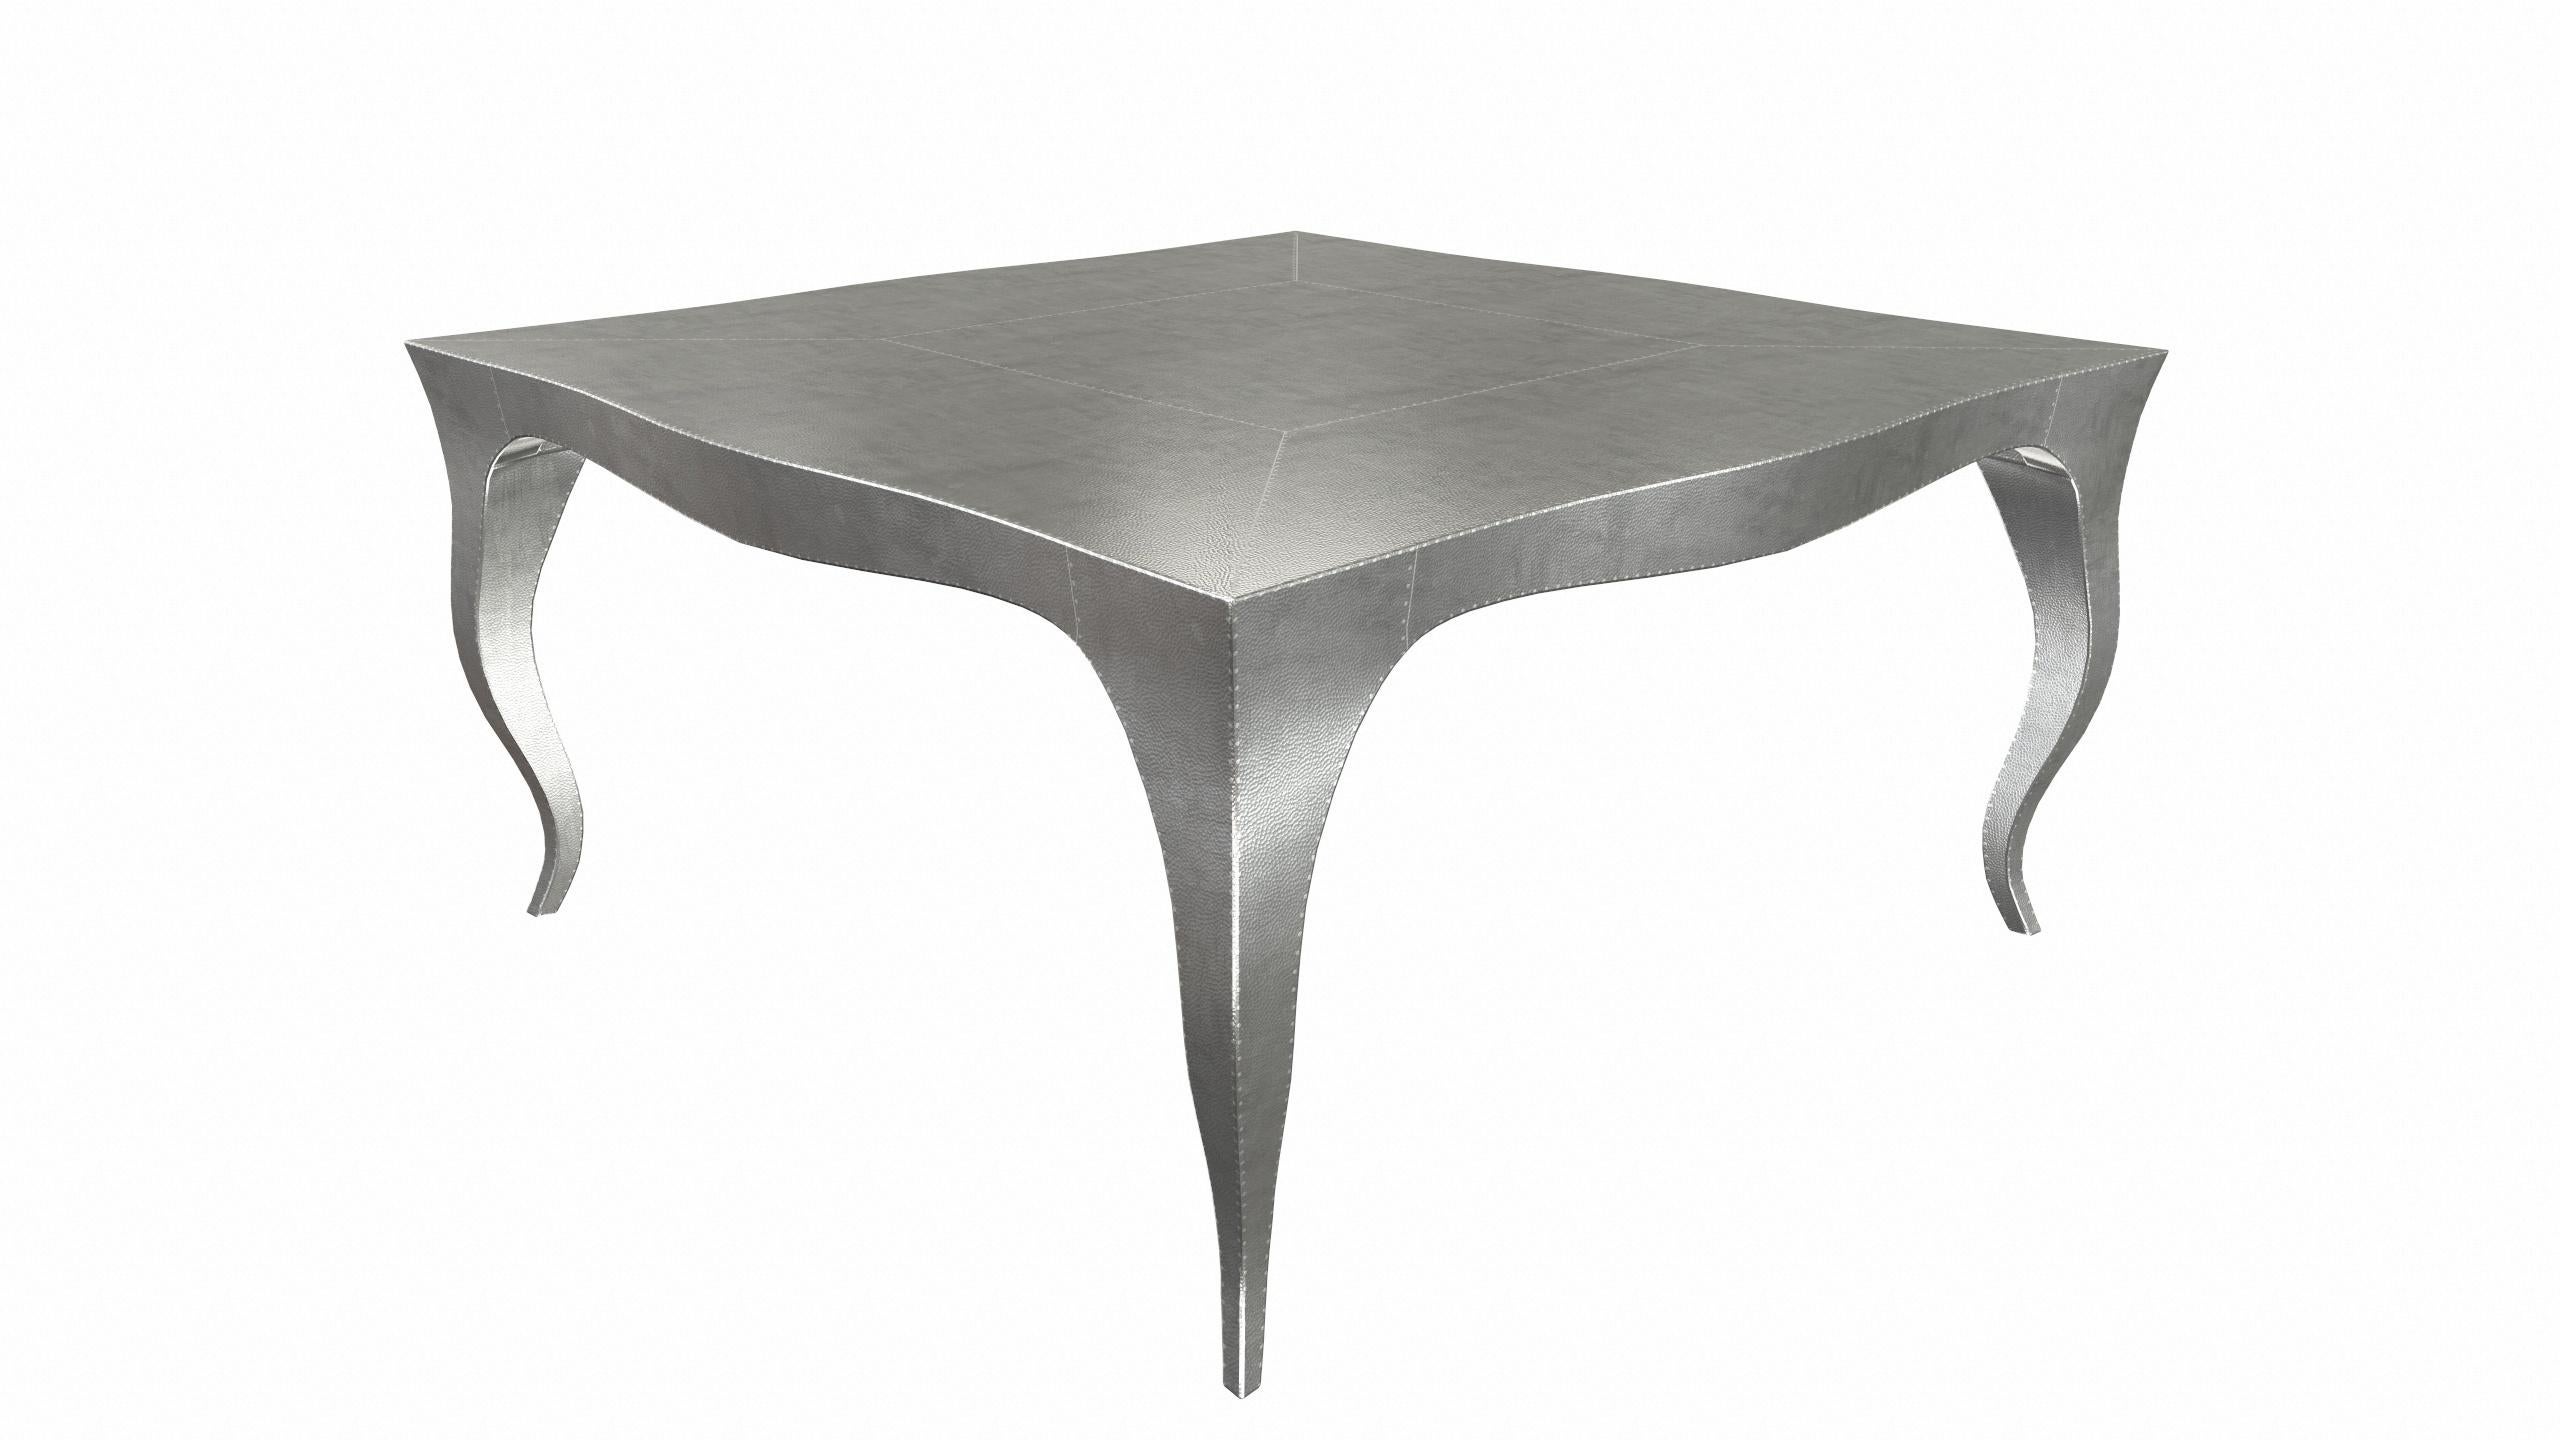 American Louise Art Deco Game Tables Mid. Hammered White Bronze by Paul Mathieu For Sale